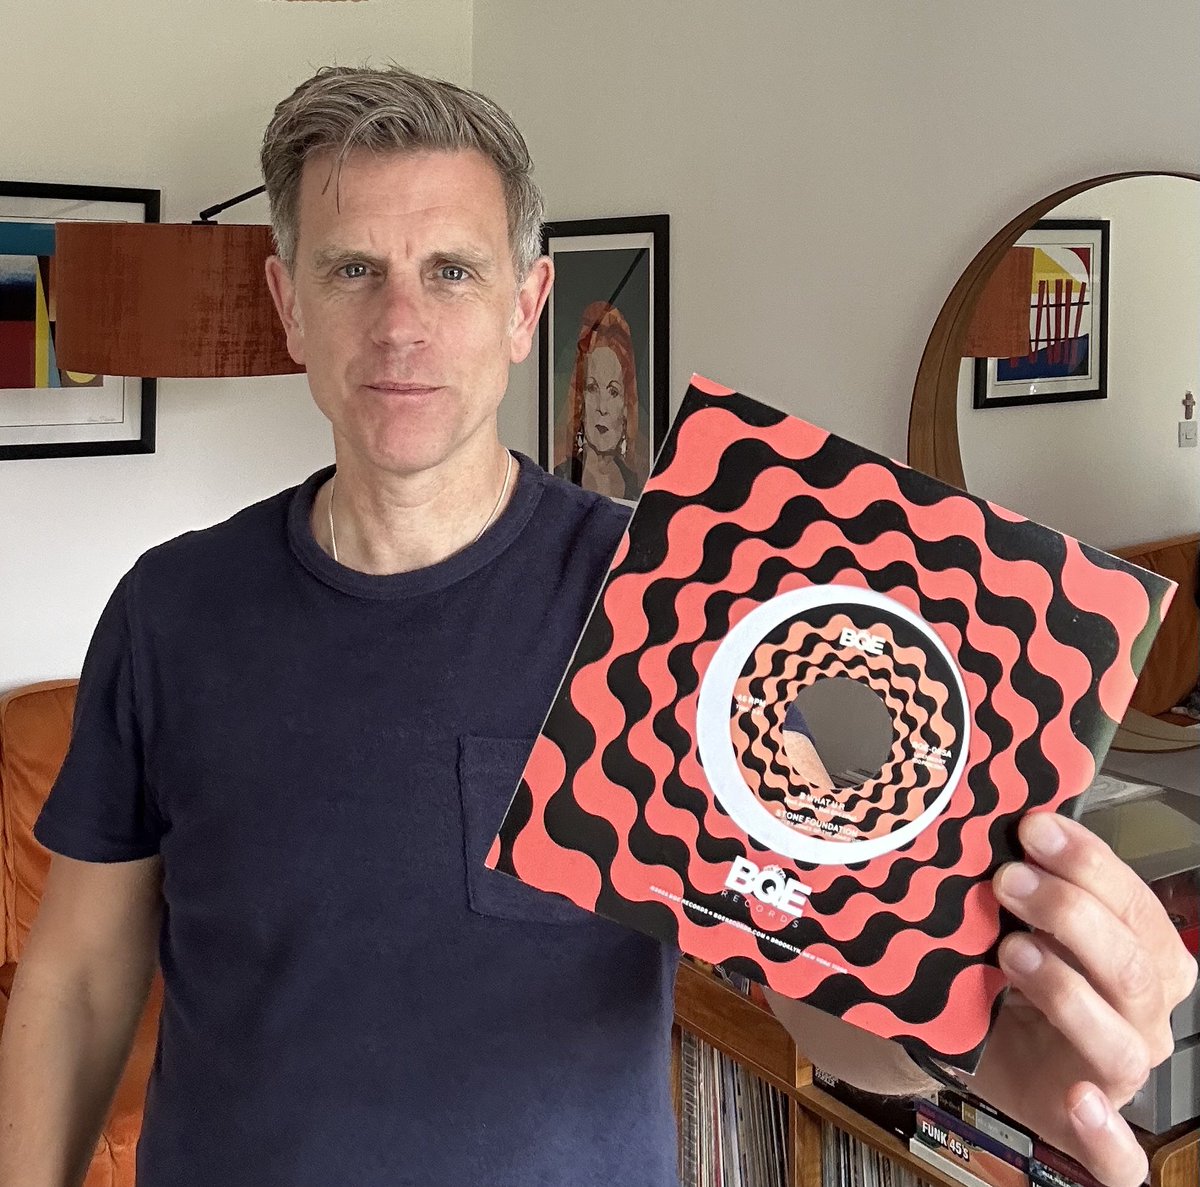 Excited to announce our first ever USA 45” release on @BQERecords will be available to buy on the SF merch desk at our Queens Hall matinee gig on June 9th. Tickets on sale now - stonefoundation.co.uk/pages/shows We’ll also have some available at Neil J & @NeilSheasby @loafersvinyl gig.